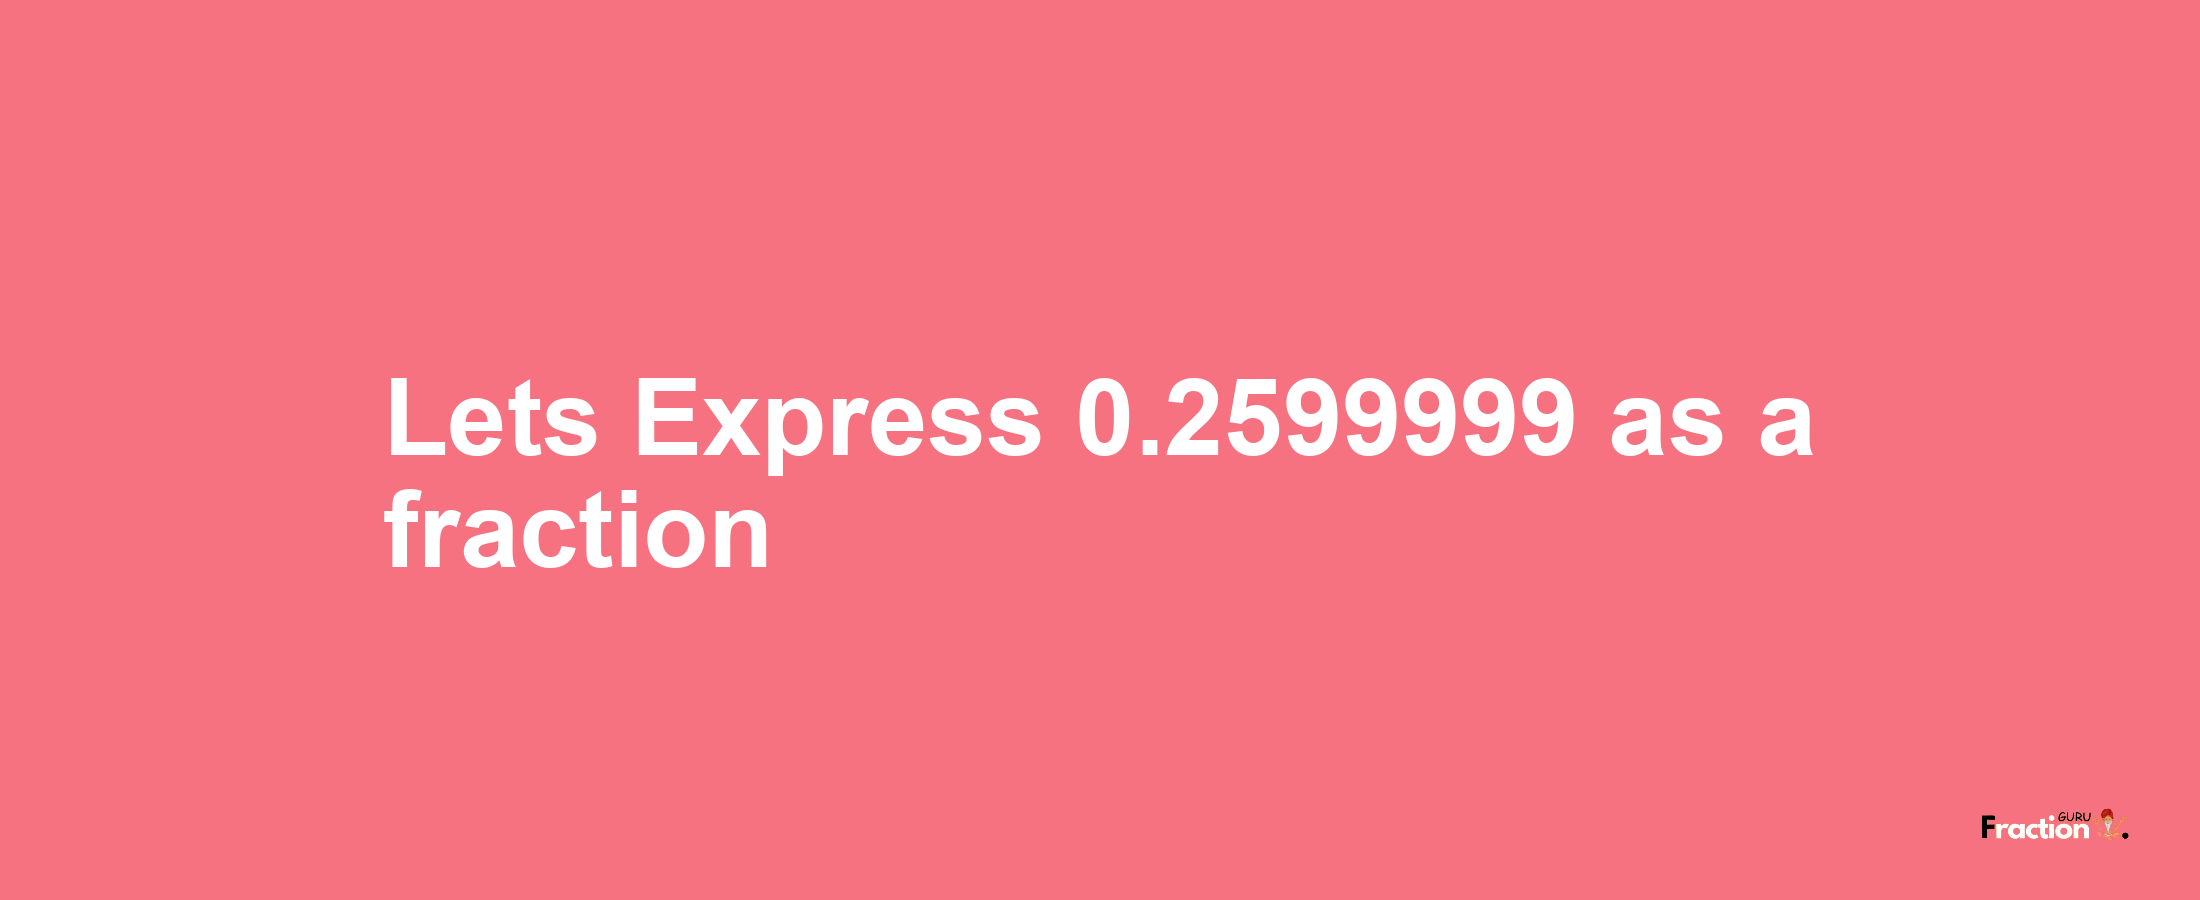 Lets Express 0.2599999 as afraction